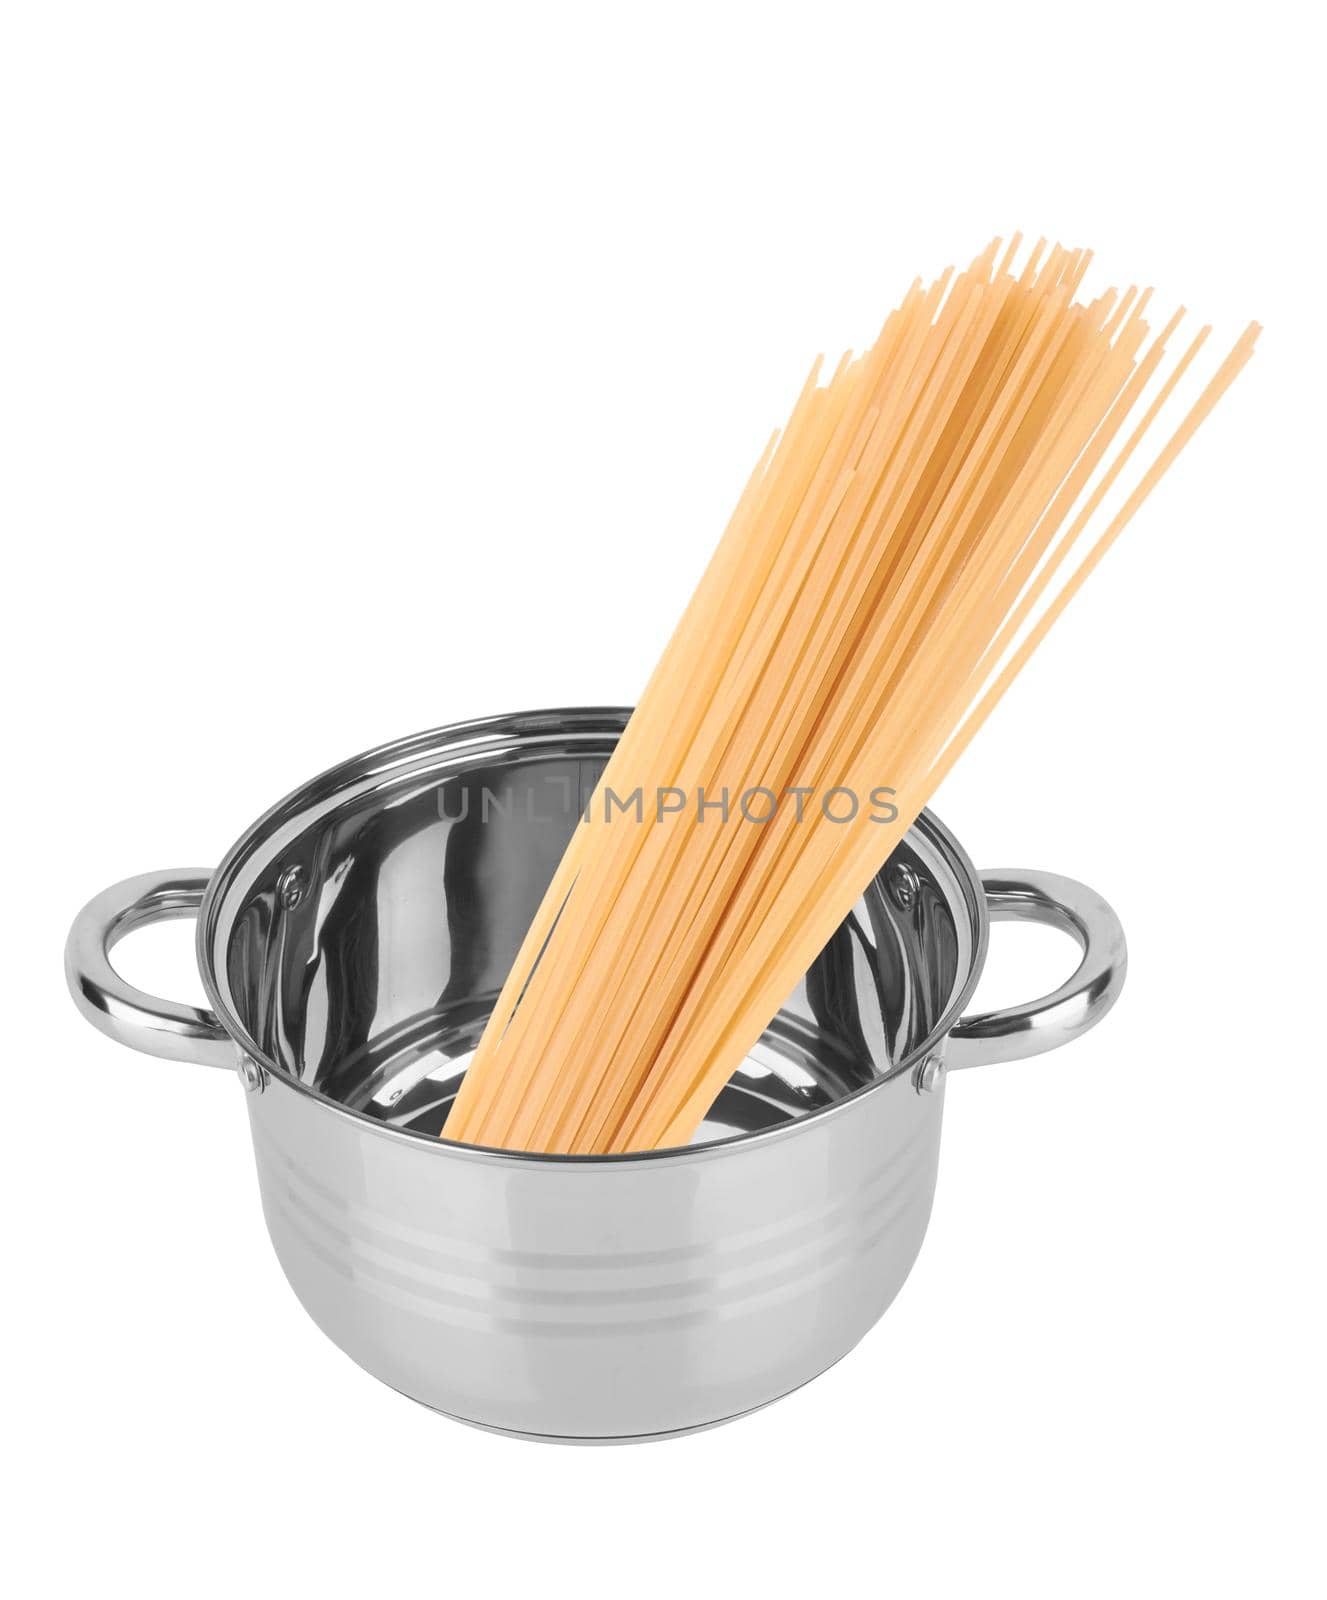 Spaghetti in a saucepan isolated on white background